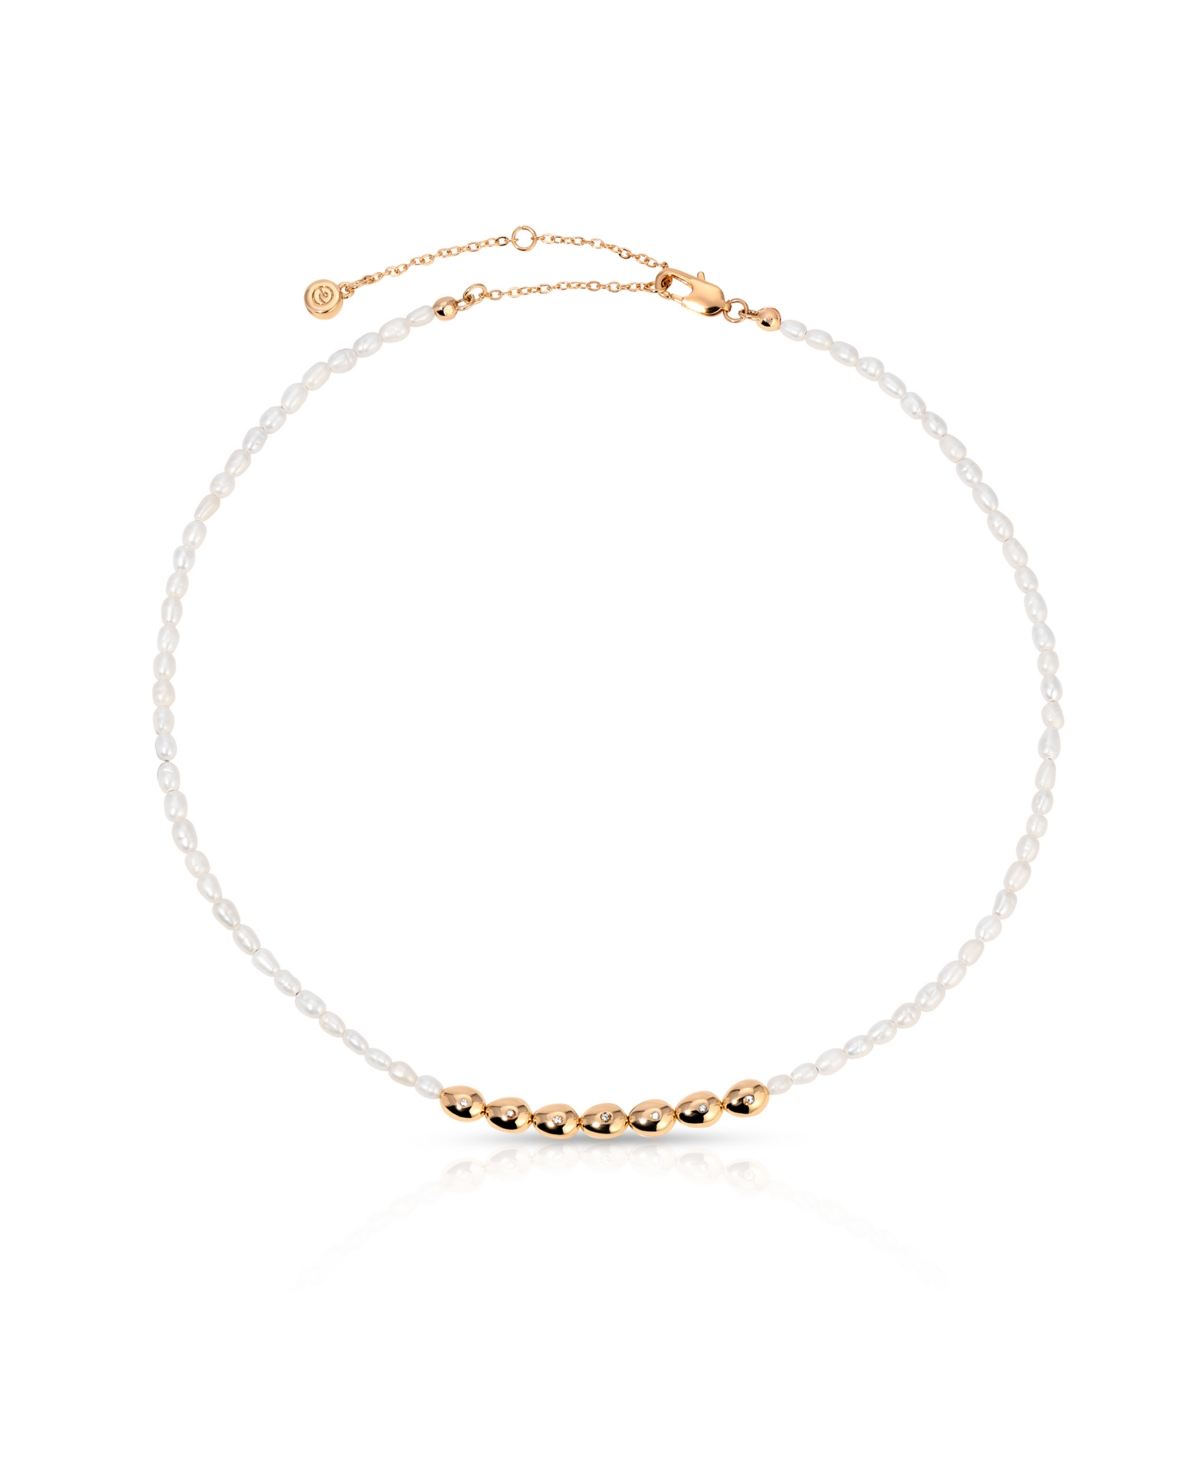 Freshwater Pearl Polished Pebble Beaded Necklace - Gold